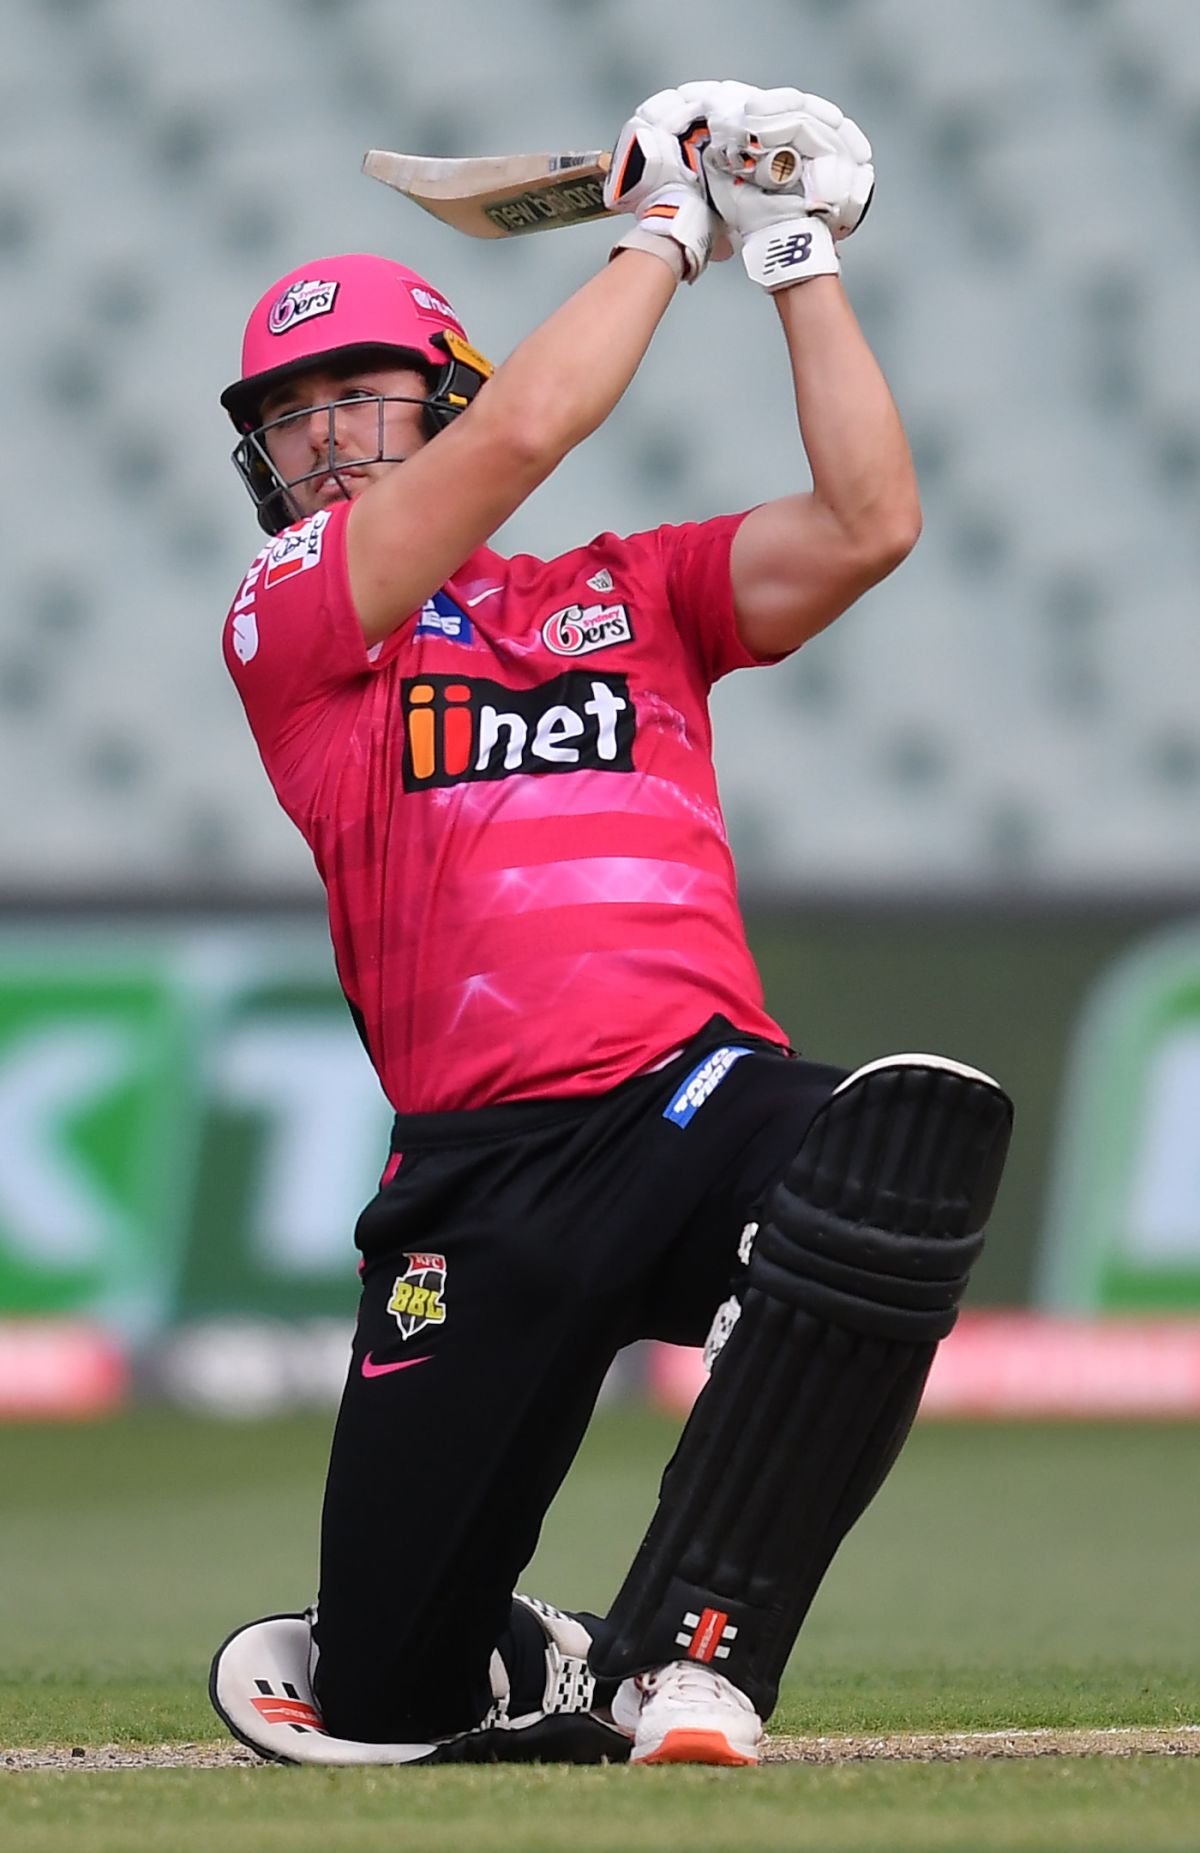 Justin Avendano plays over the off-side infield, Adelaide Strikers vs Sydney Strikers, BBL 2021-22, Adelaide, January 17, 2022